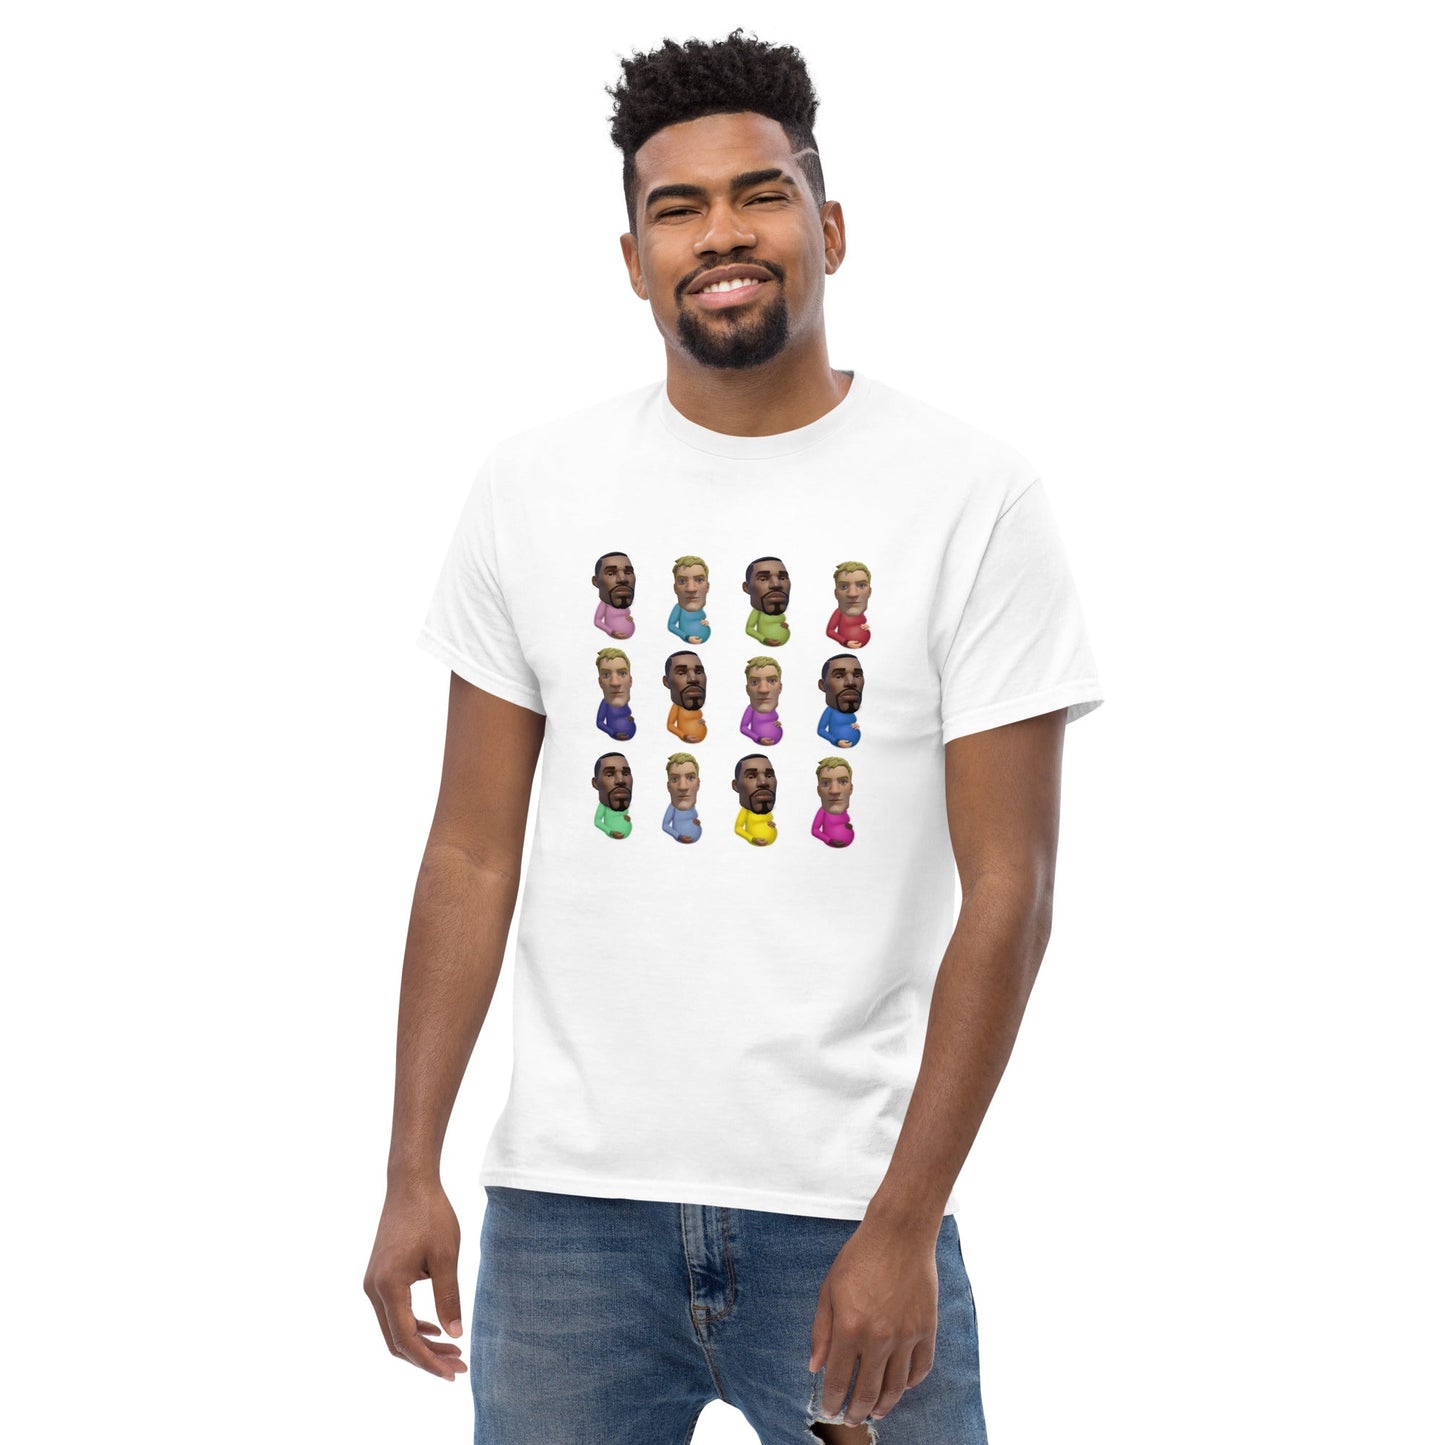 My CLB Tee® - Buy One Get One 50% OFF